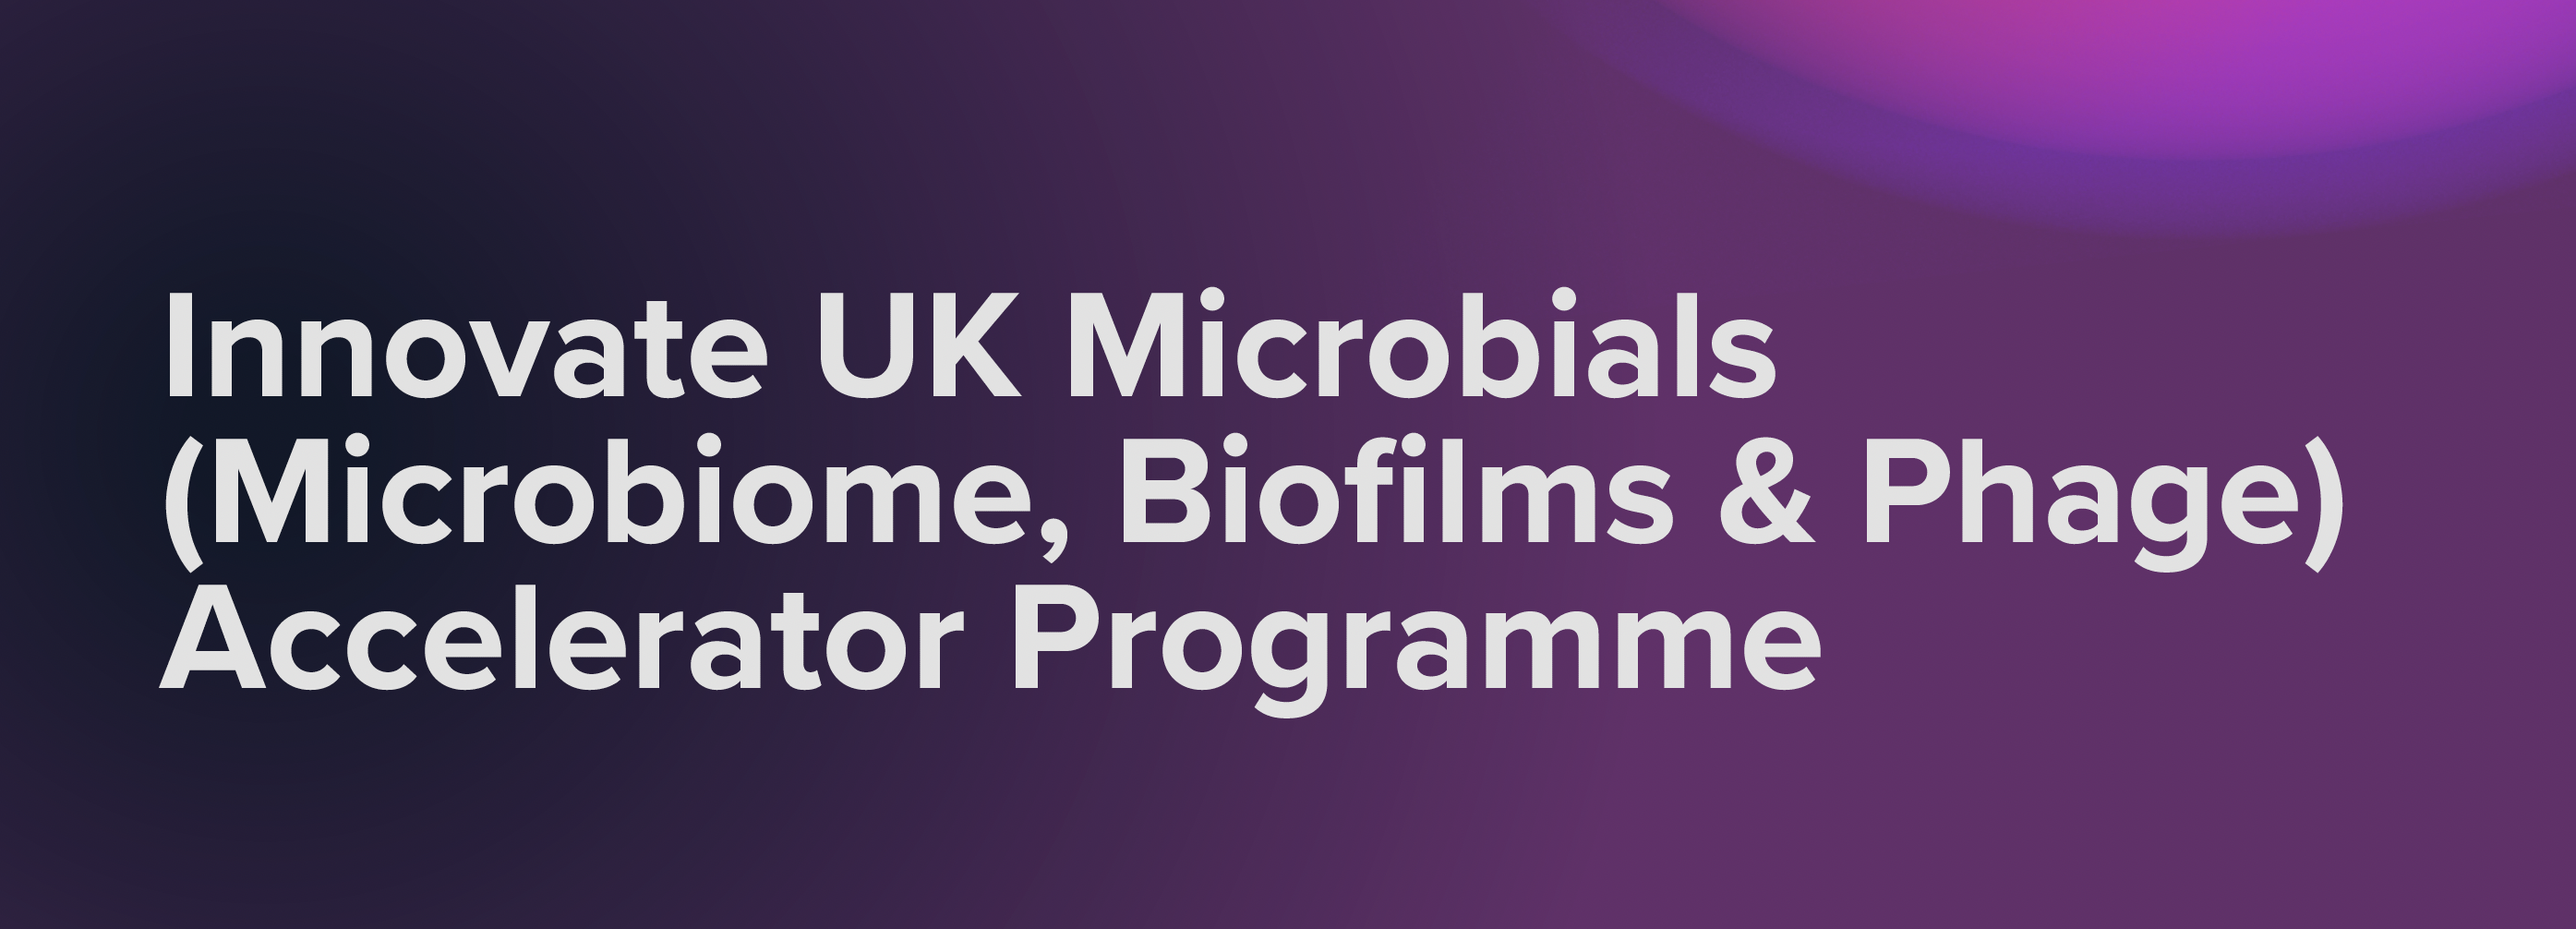 GC selected to participate in the Microbials Accelerator Programme!